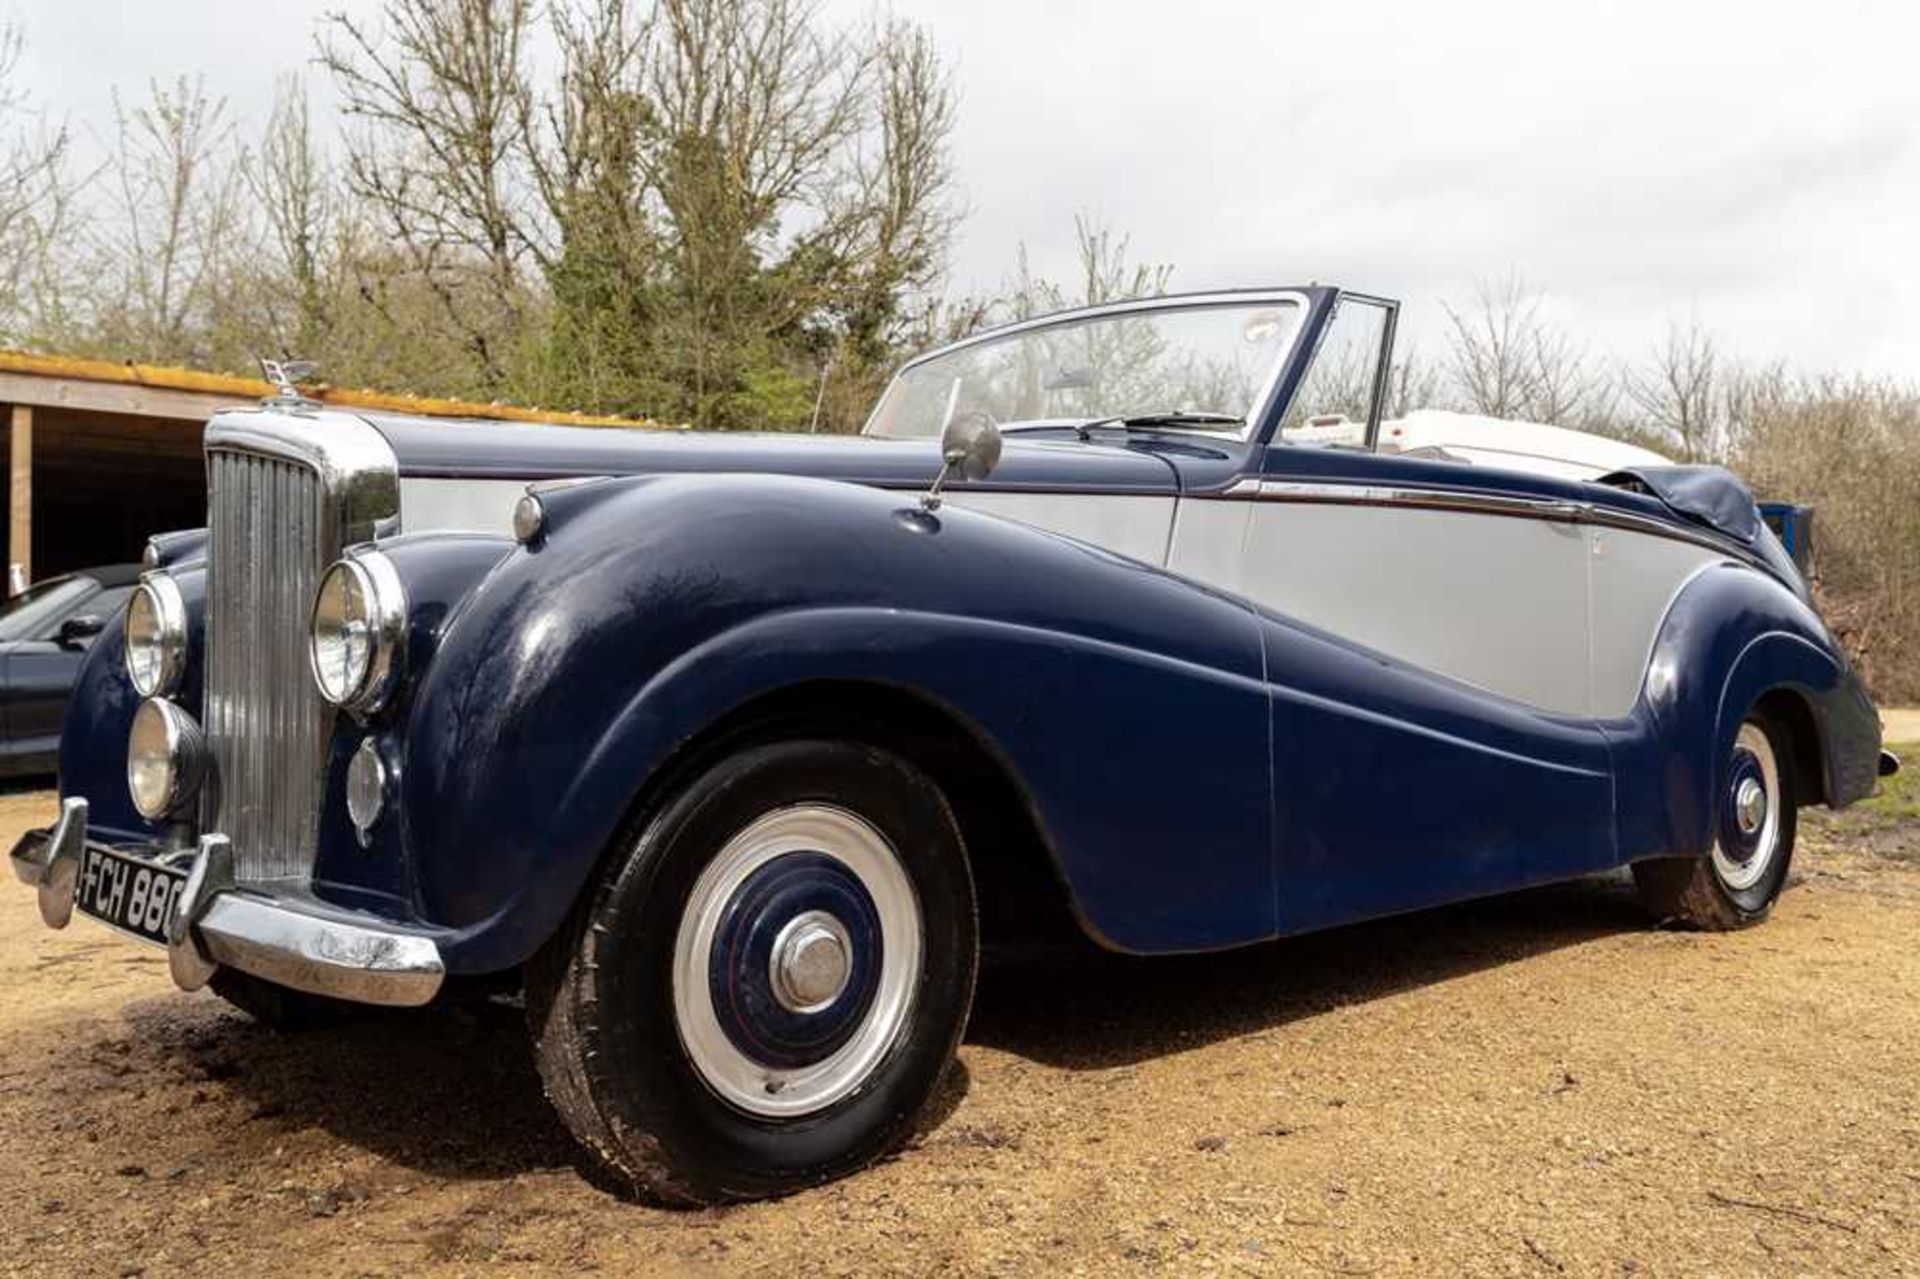 1954 Bentley R-Type Park Ward Drophead Coupe 1 of just 9 R-Type chassis clothed to Design 552 - Image 19 of 86